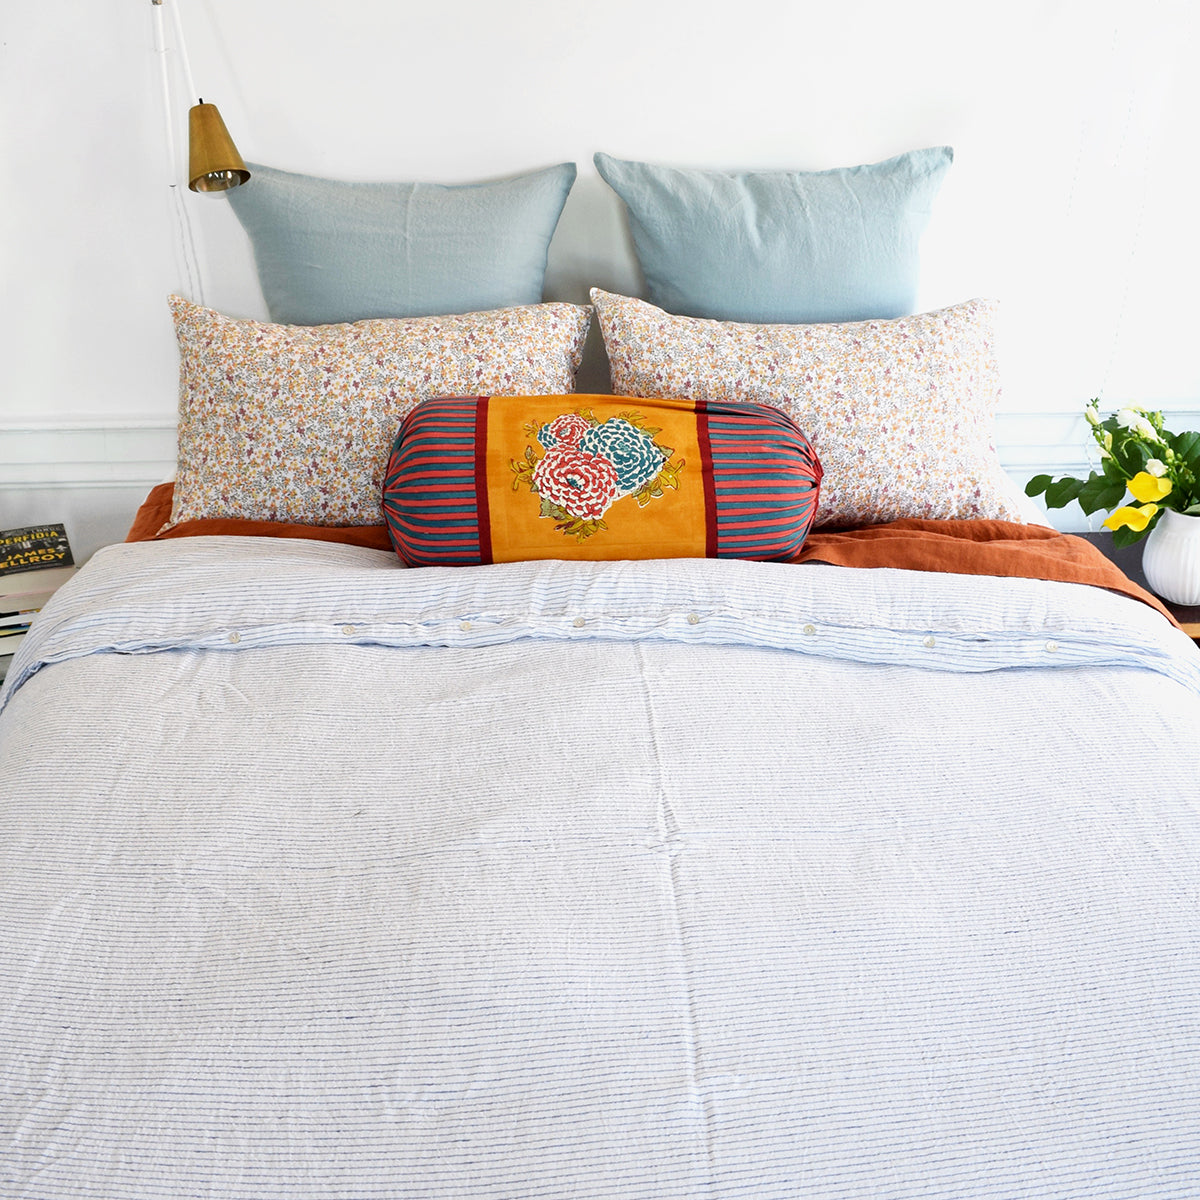 A Linge Particulier Linen Duvet in Atlantic Blue Stripe gives a white and blue pinstripe color to this duvet for a sky blue patterned and printed linen bedding look from Collyer&#39;s Mansion